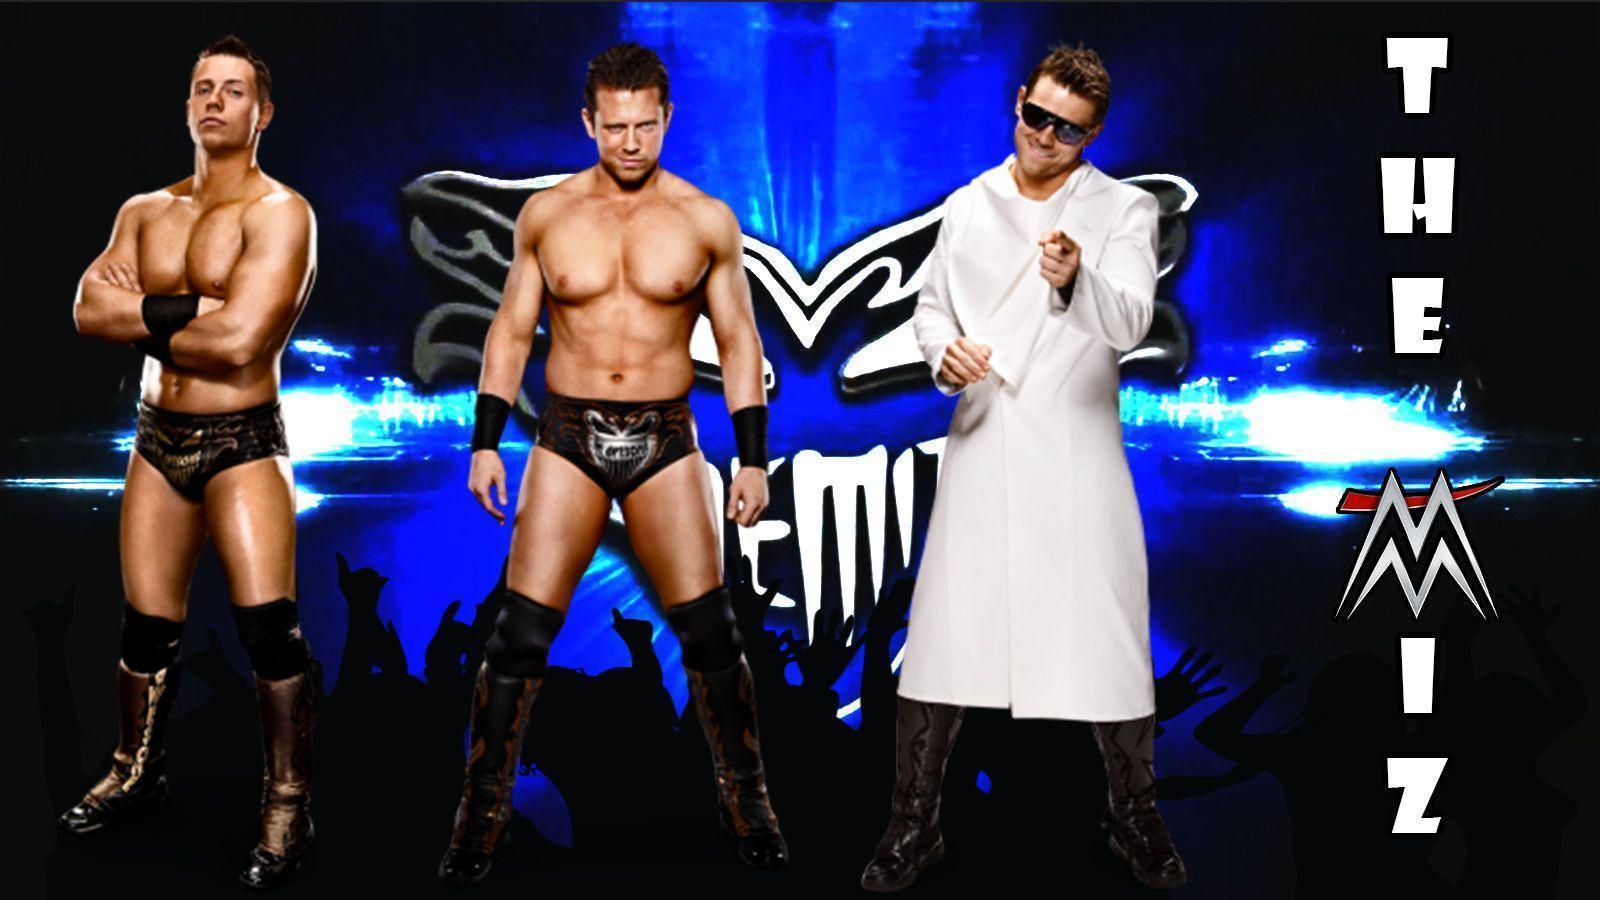 The miz evolution Wallpapers 1600x900 by rory1171.